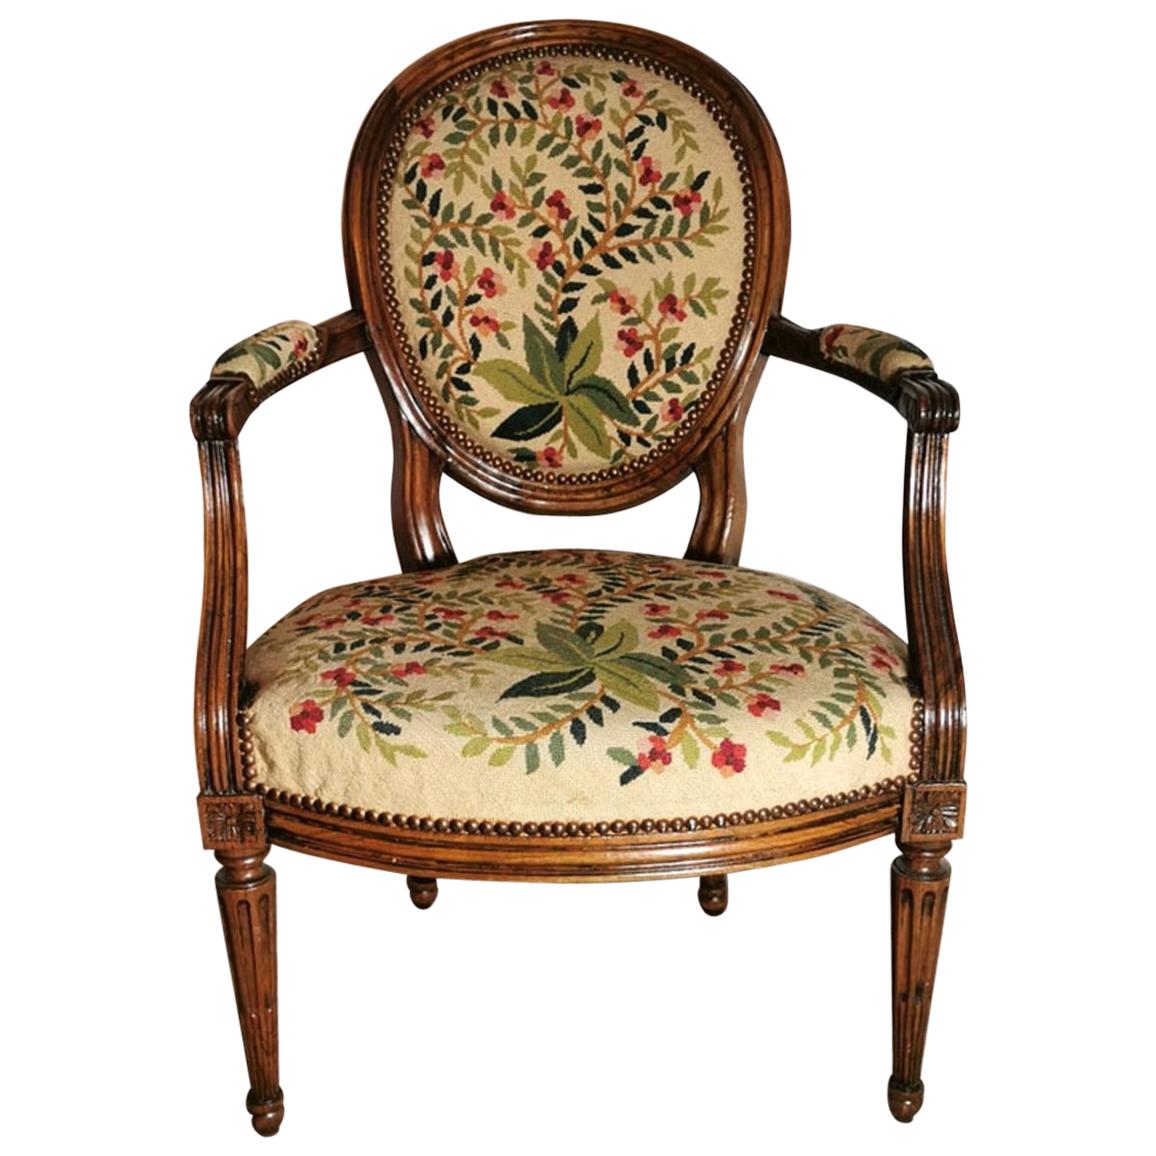 19th Century Walnut Armchair  with Needlepoint Upholstery France